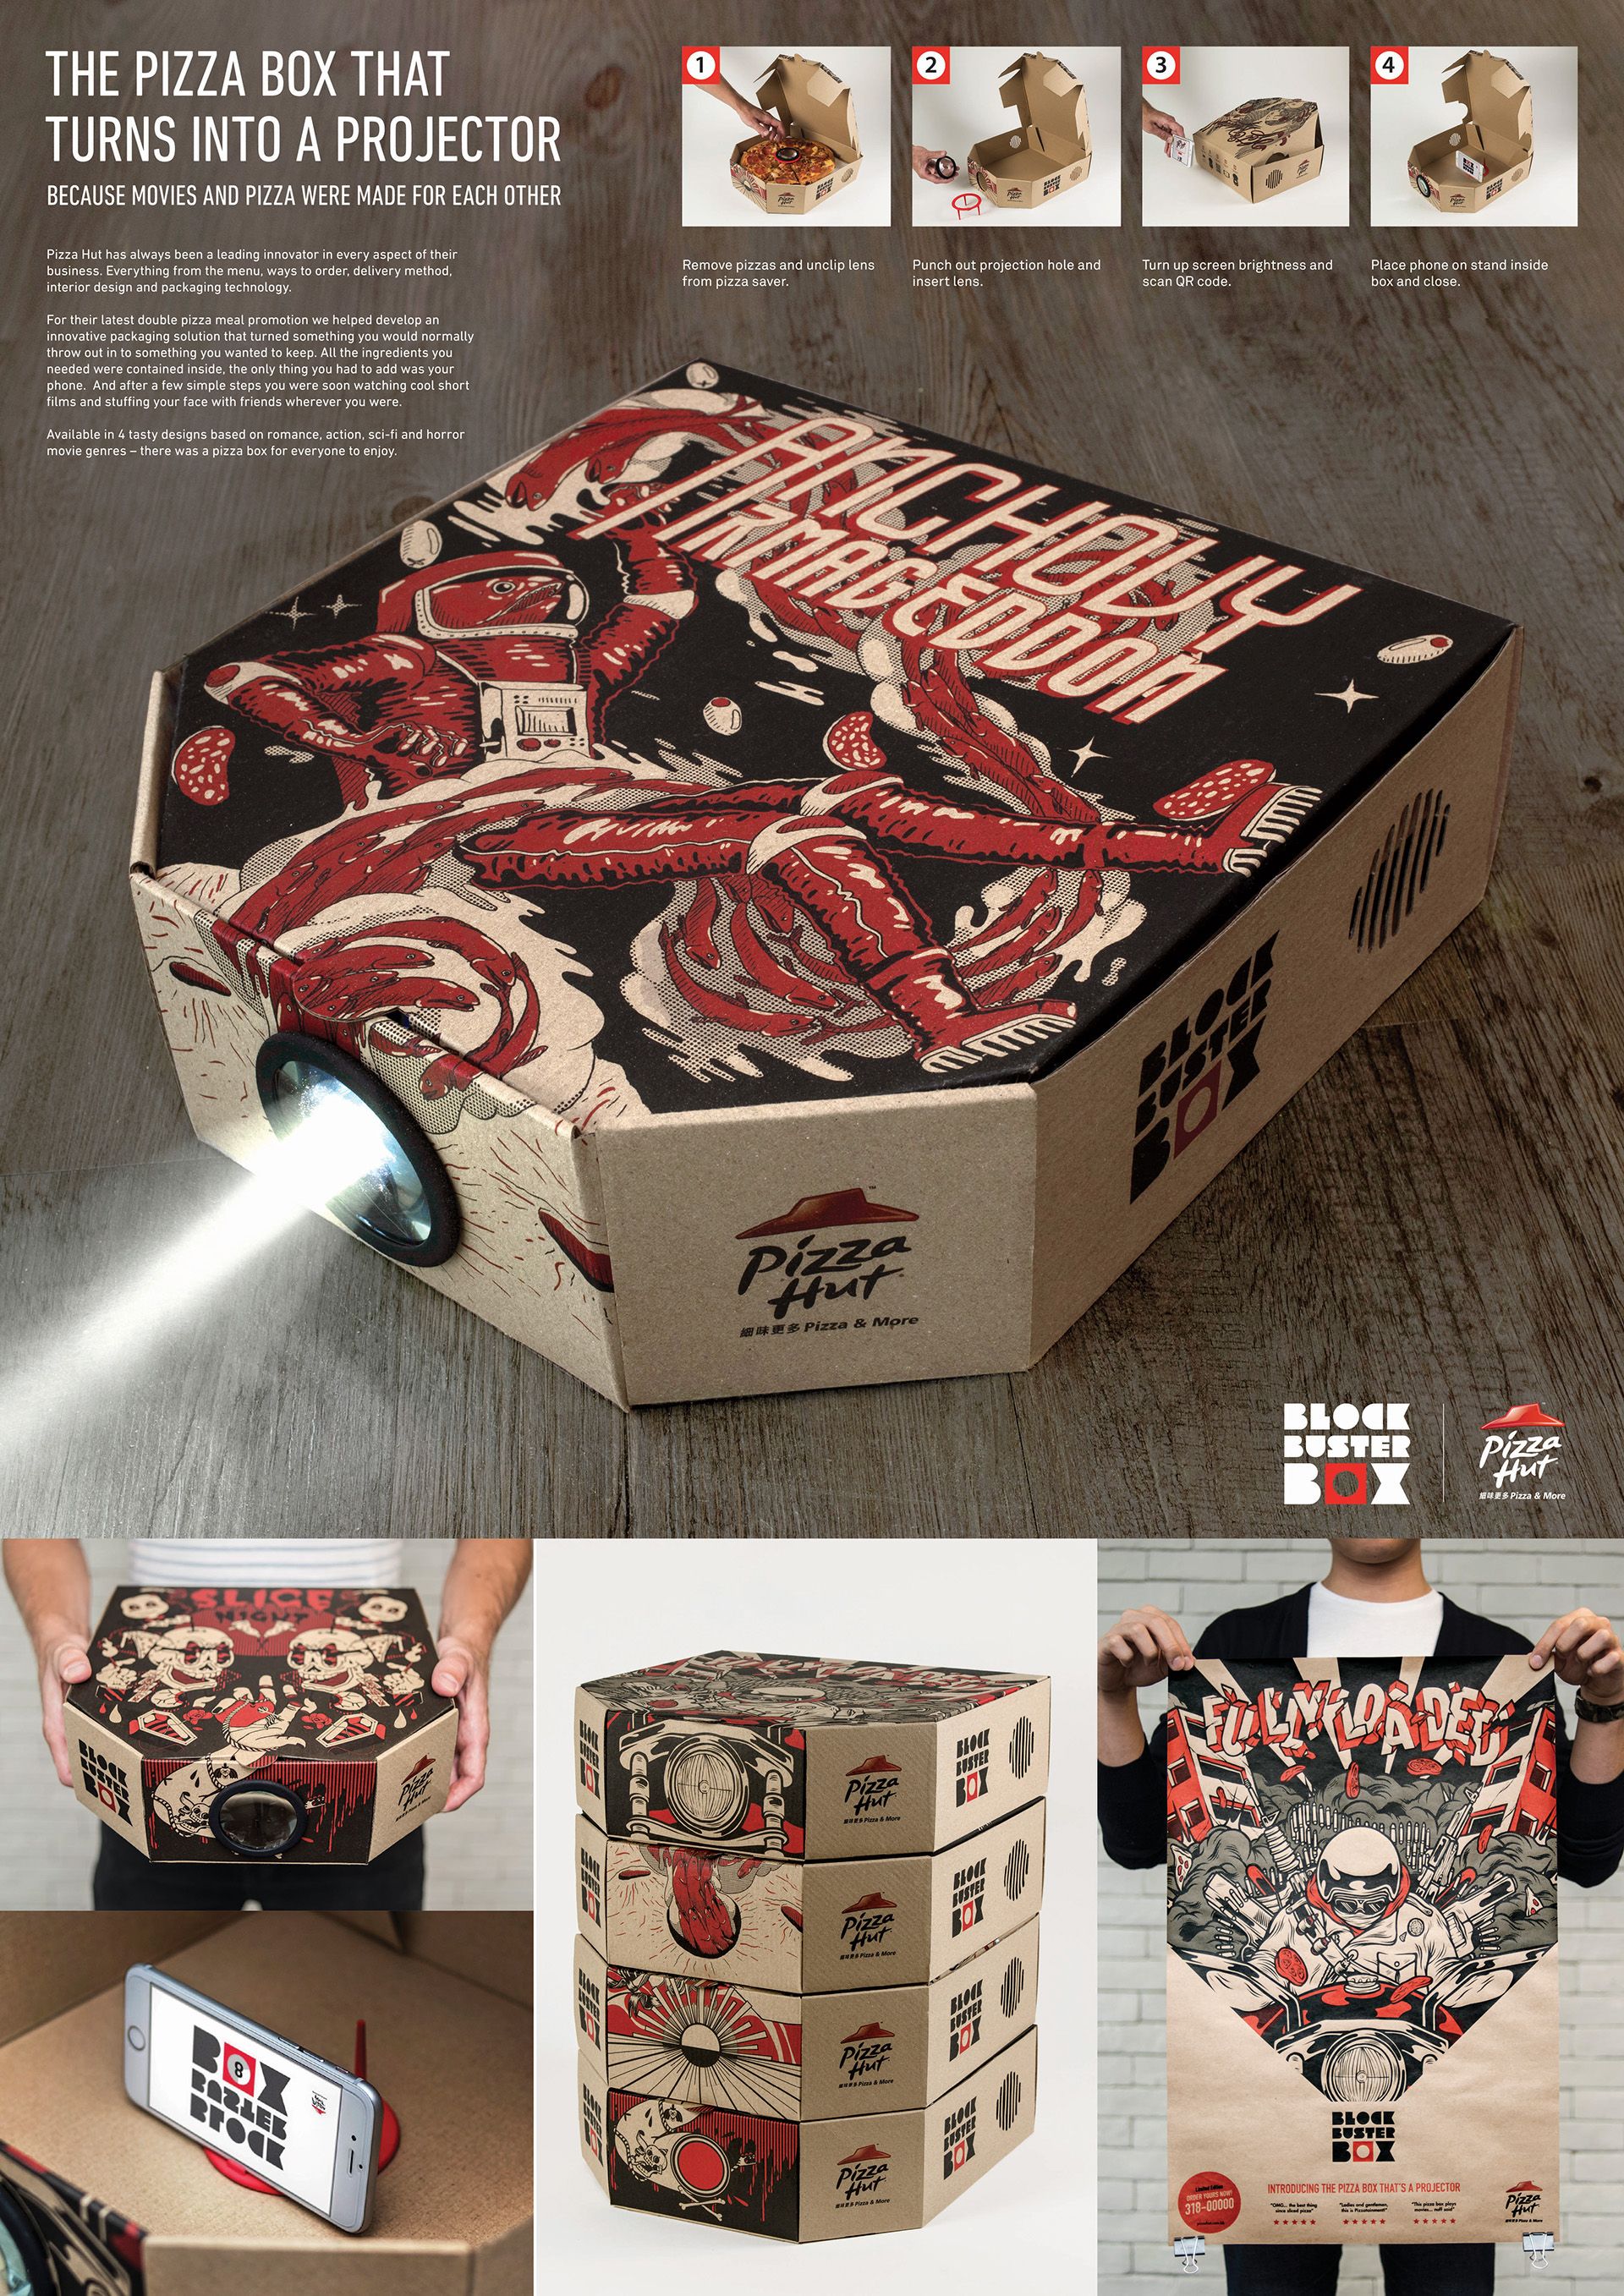 Pizza Hut Has a New Box That Doubles as a Movie Projector 